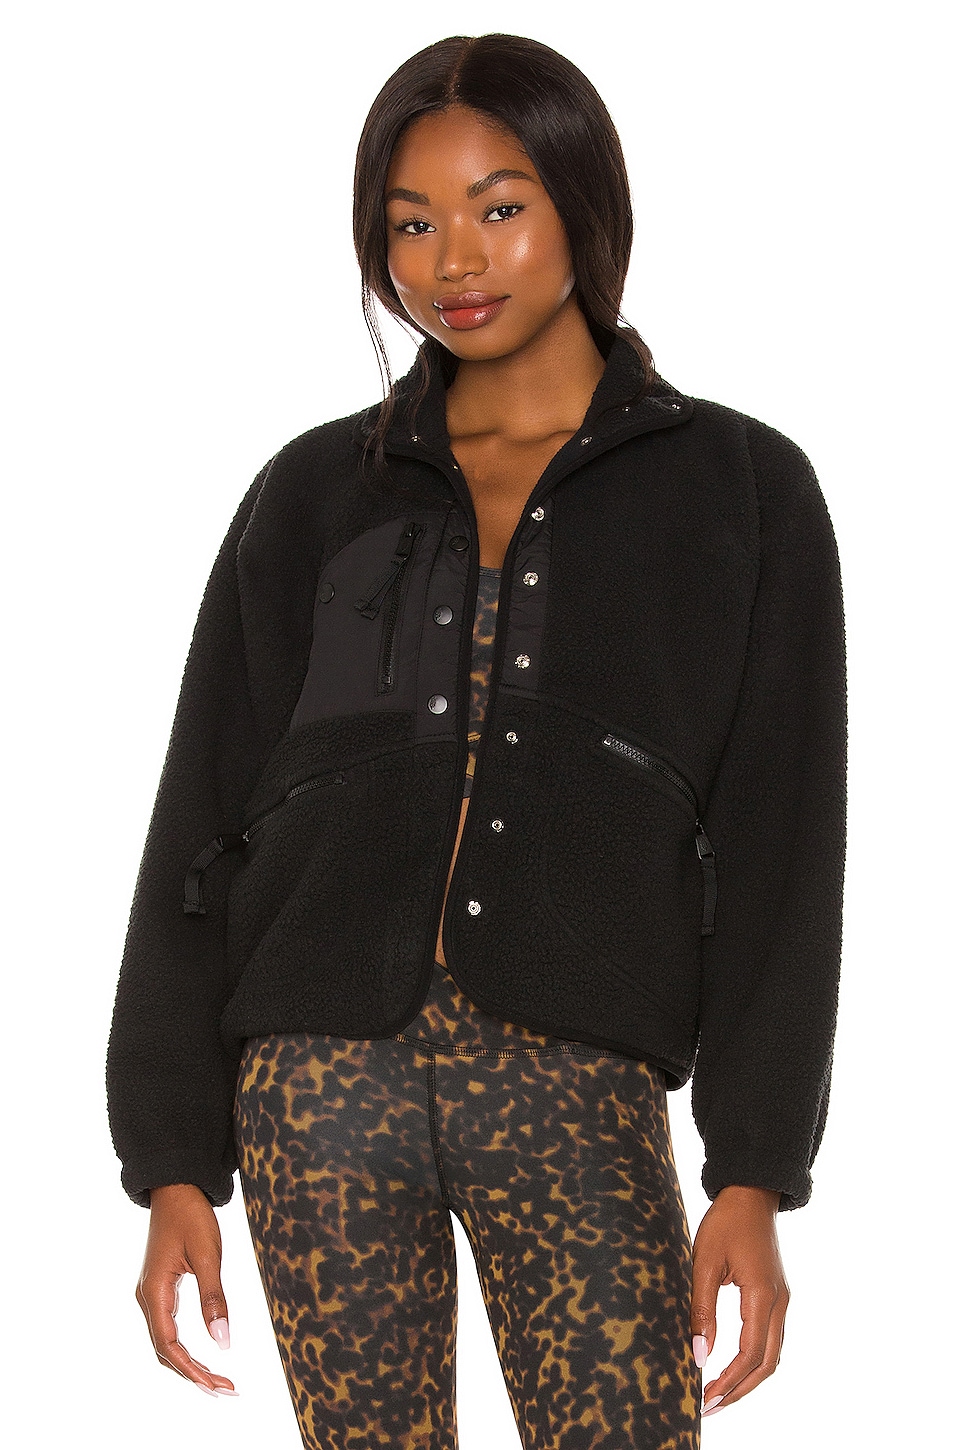 The Hit The Slopes Fleece Jacket by Free People - Puckered Up